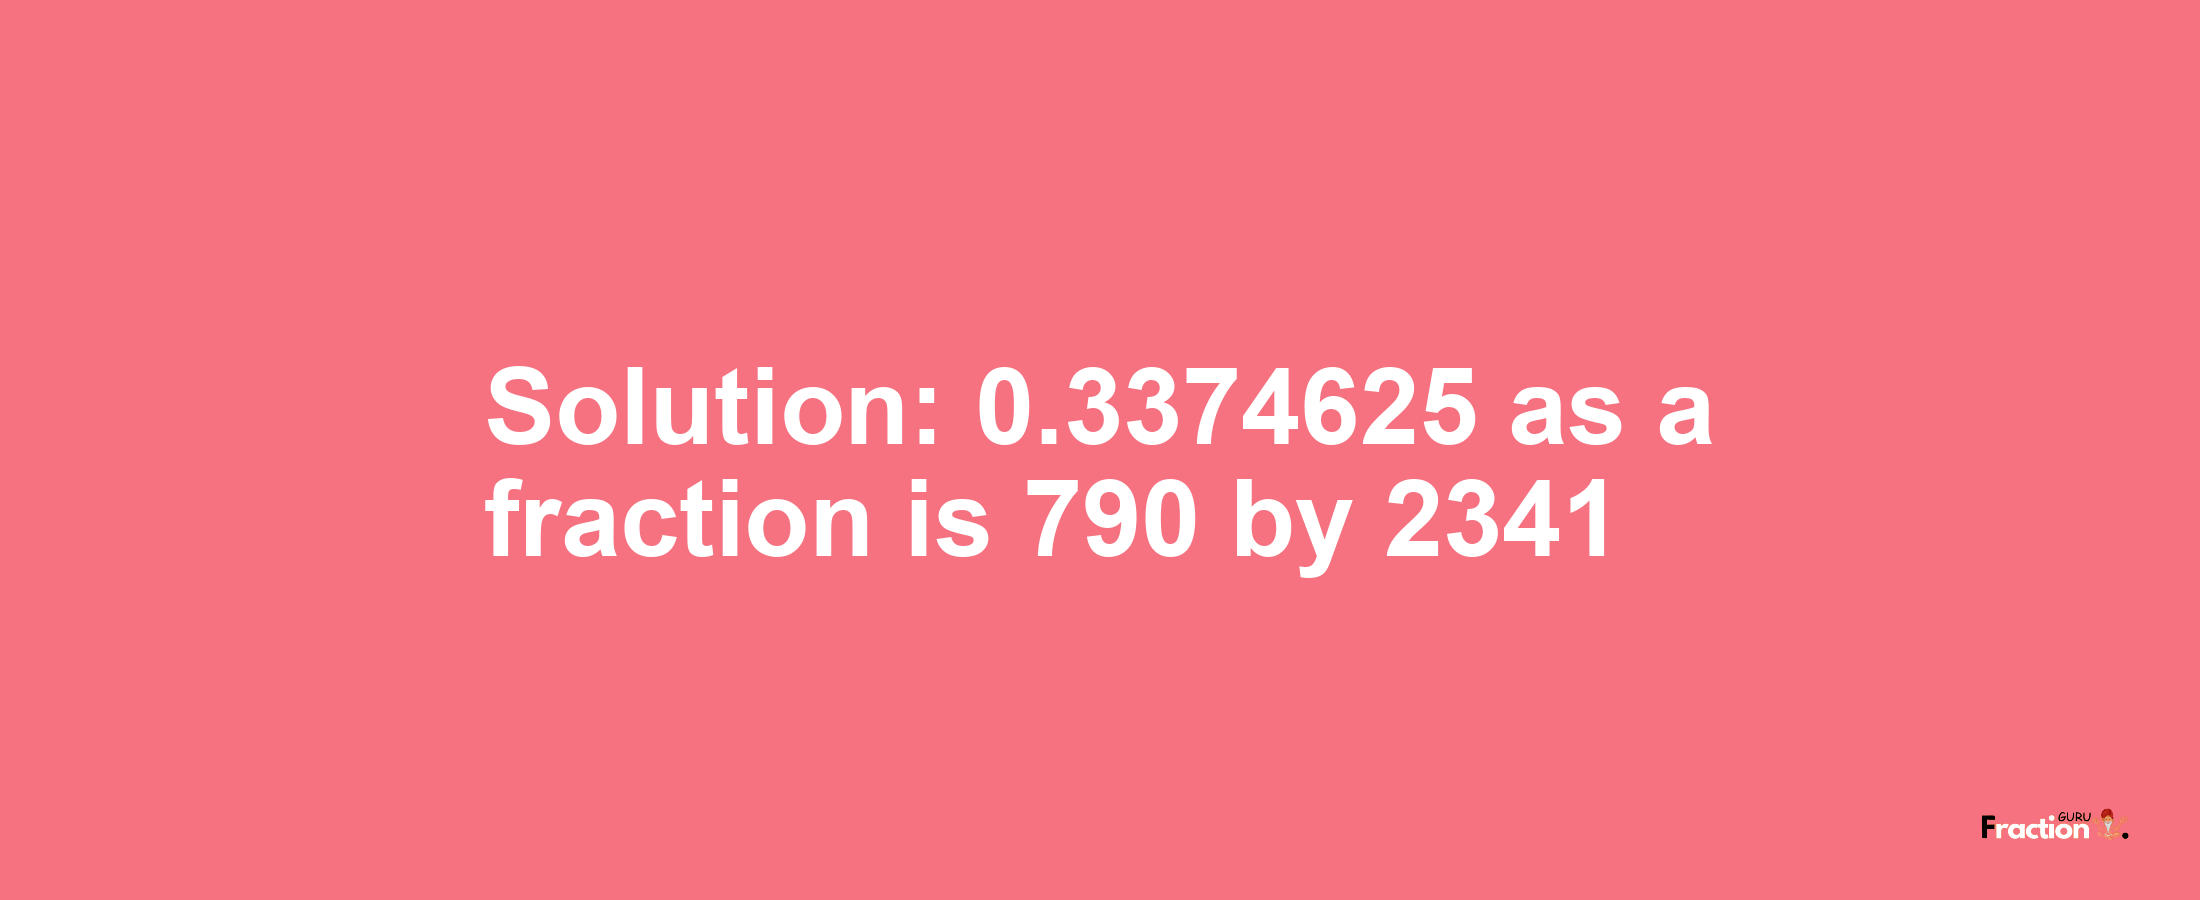 Solution:0.3374625 as a fraction is 790/2341